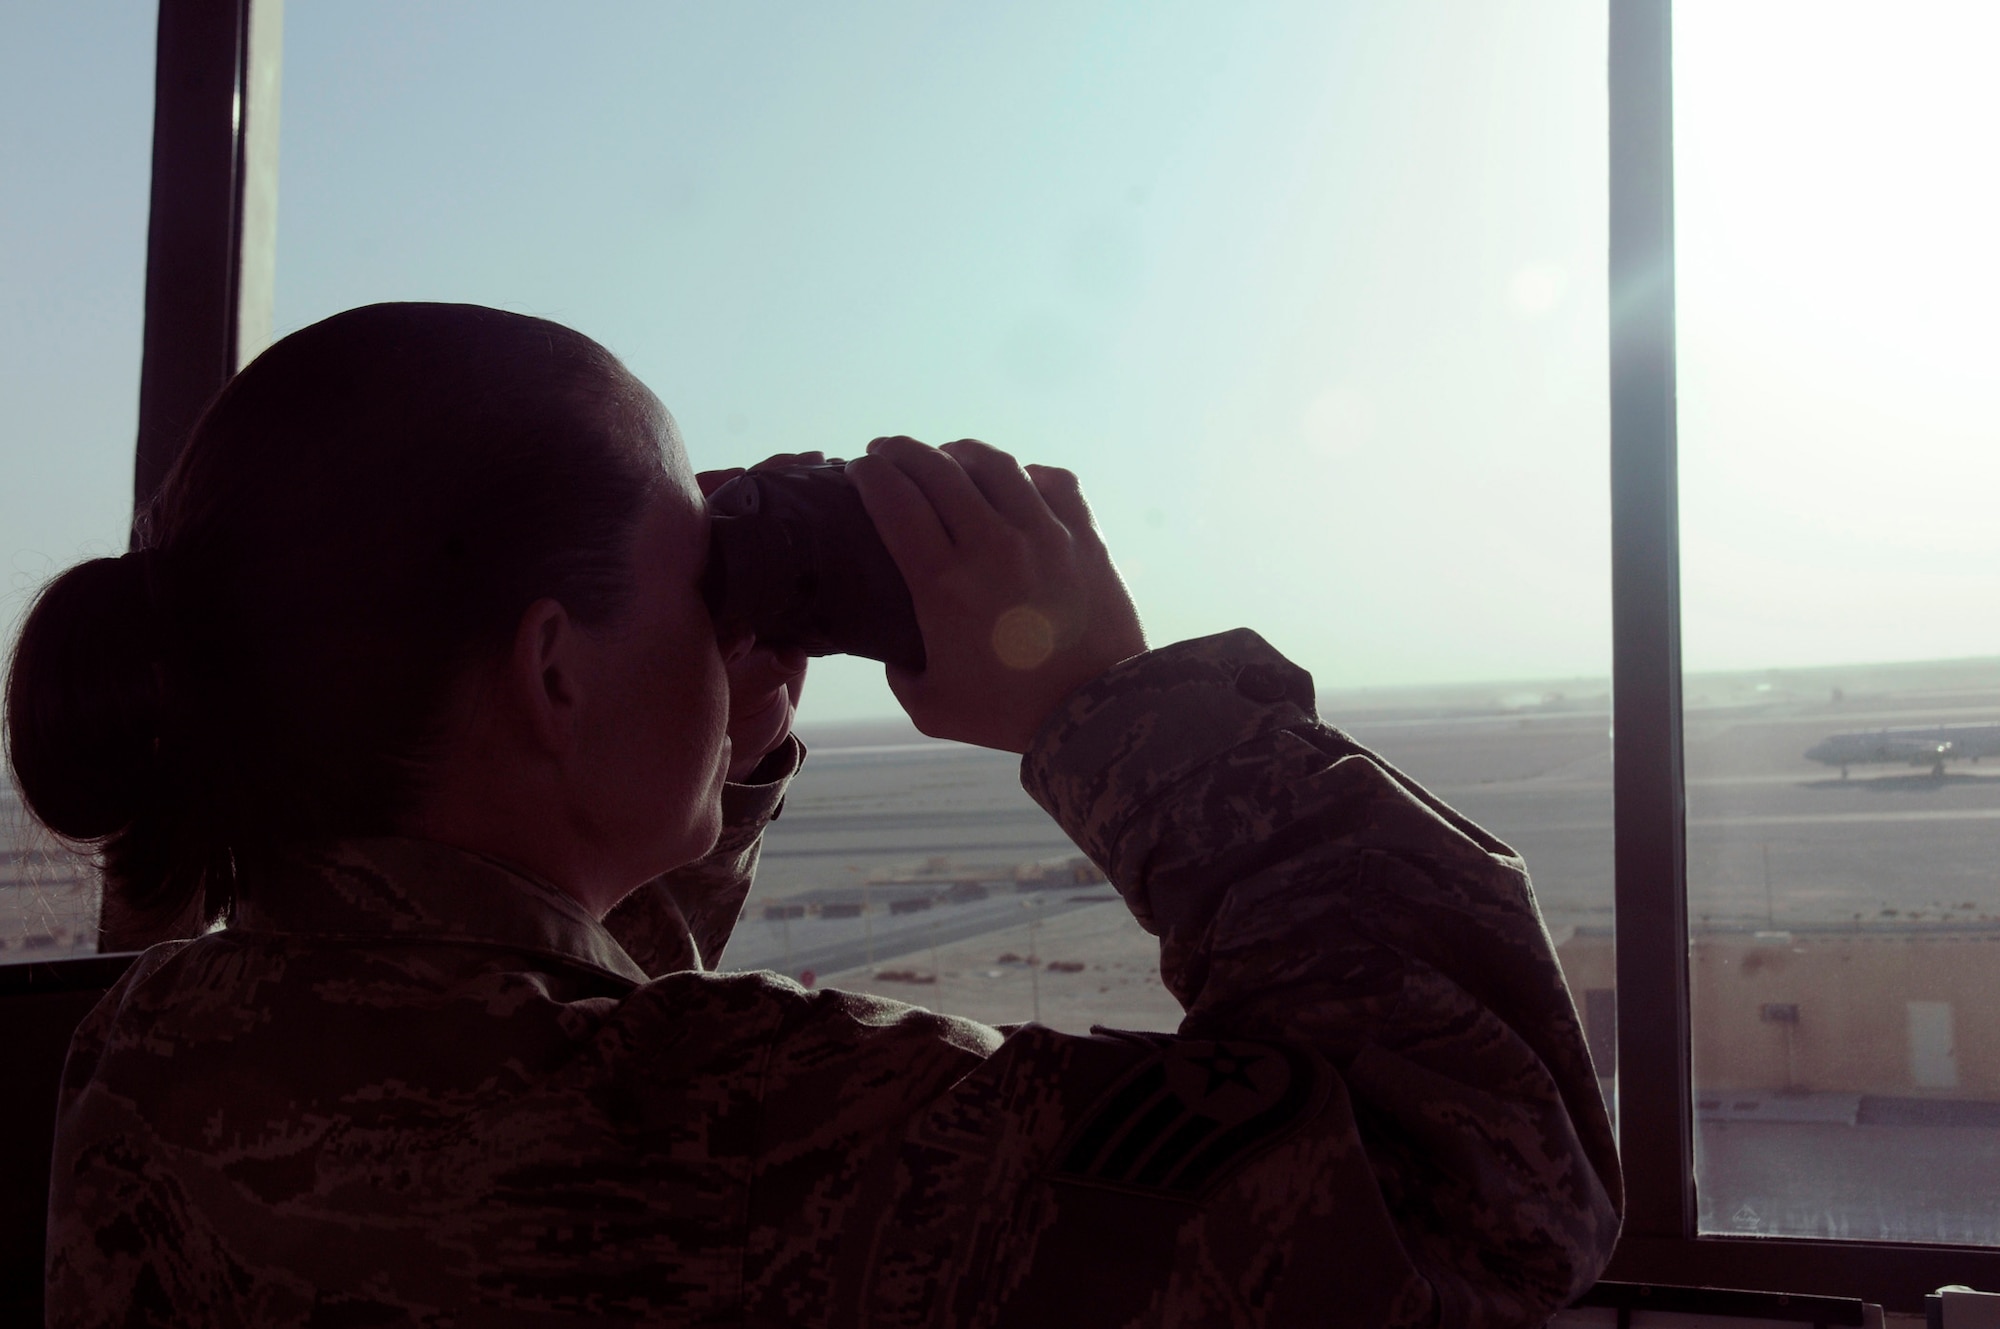 Staff Sgt. Sandra Trull, air traffic controller specialist assigned to the 379th Expeditionary Operations Support Squadron, looks through binoculars to check a mechanical problem on an aircraft Oct. 20, 2008 at an undisclosed location in Southwest Asia. A three-person team of air traffic controllers ensures the safety of more than 1,200 operations weekly by following ATC guidelines. Sergeant Trull, a native of Asheville, N.C., is deployed from McEntire Joint National Guard Base Columbia, S.C. (U.S. Air Force photo by Staff Sgt. Darnell T. Cannady)